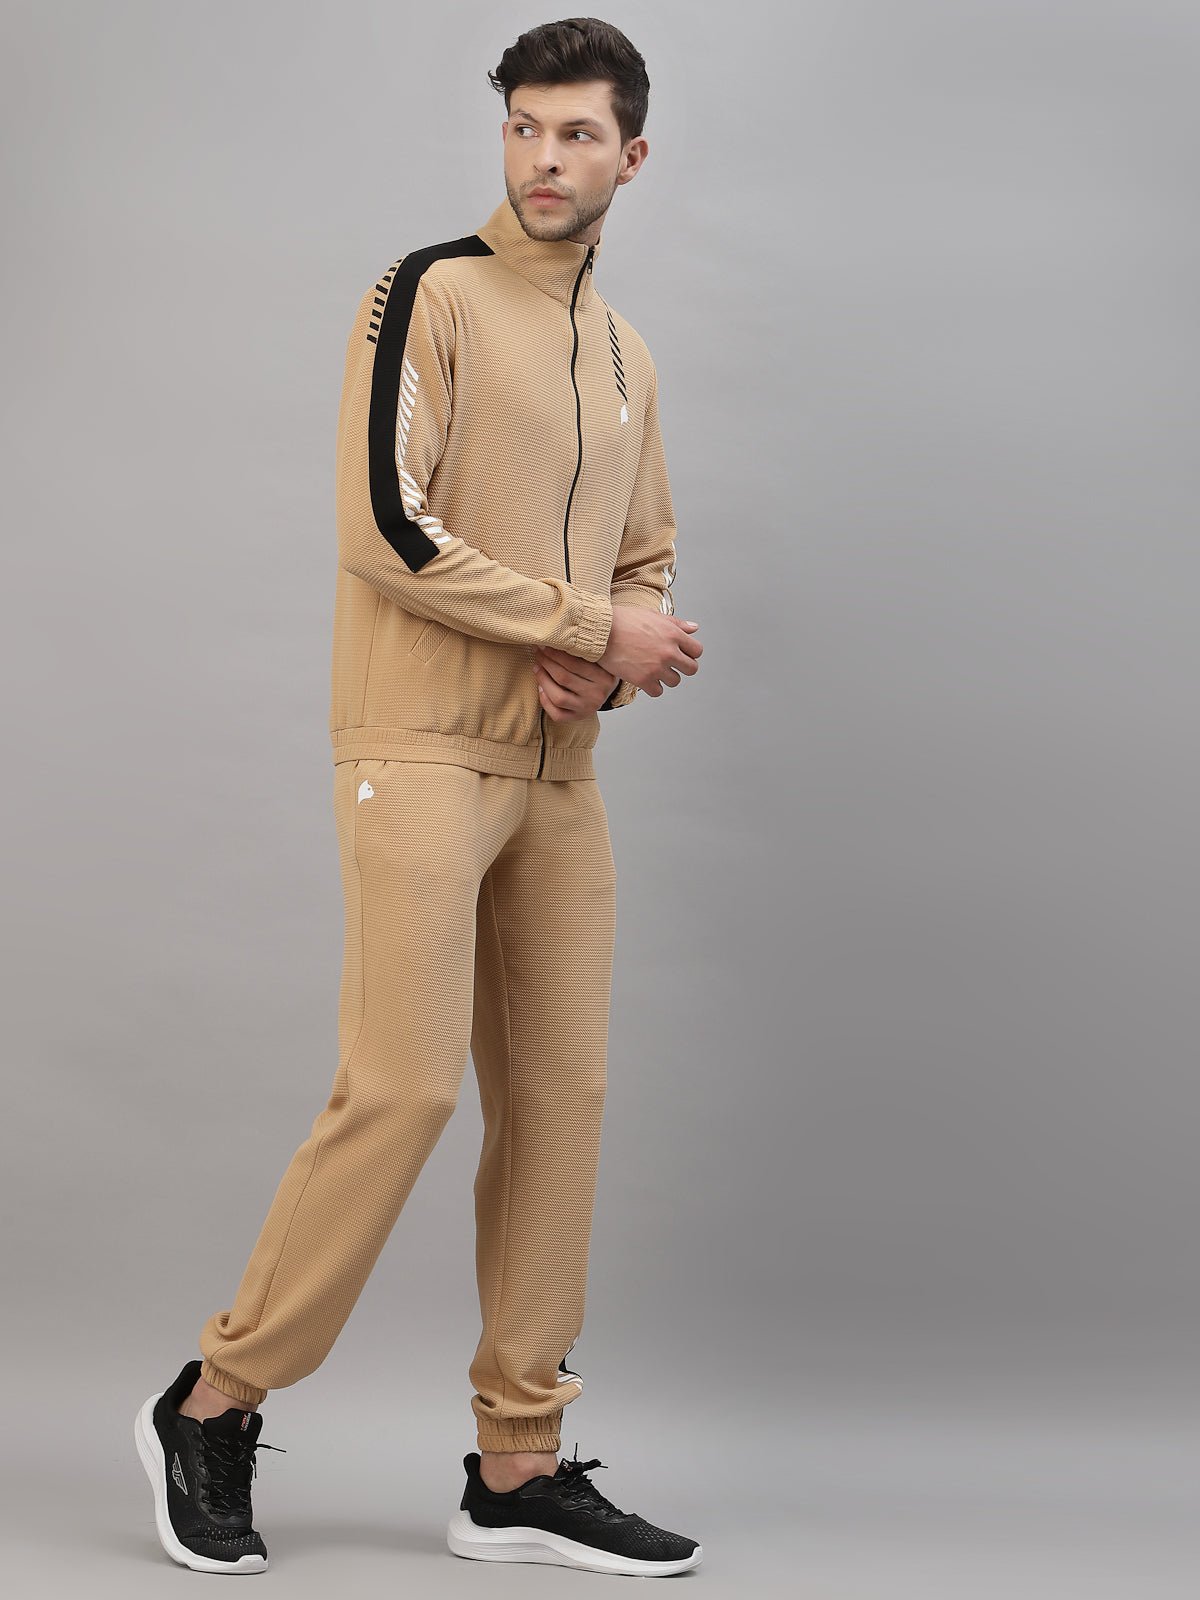 Just Billi men's co-ord ser camel colour, luxury athleisure wear for men, airport look by JUST BILLI